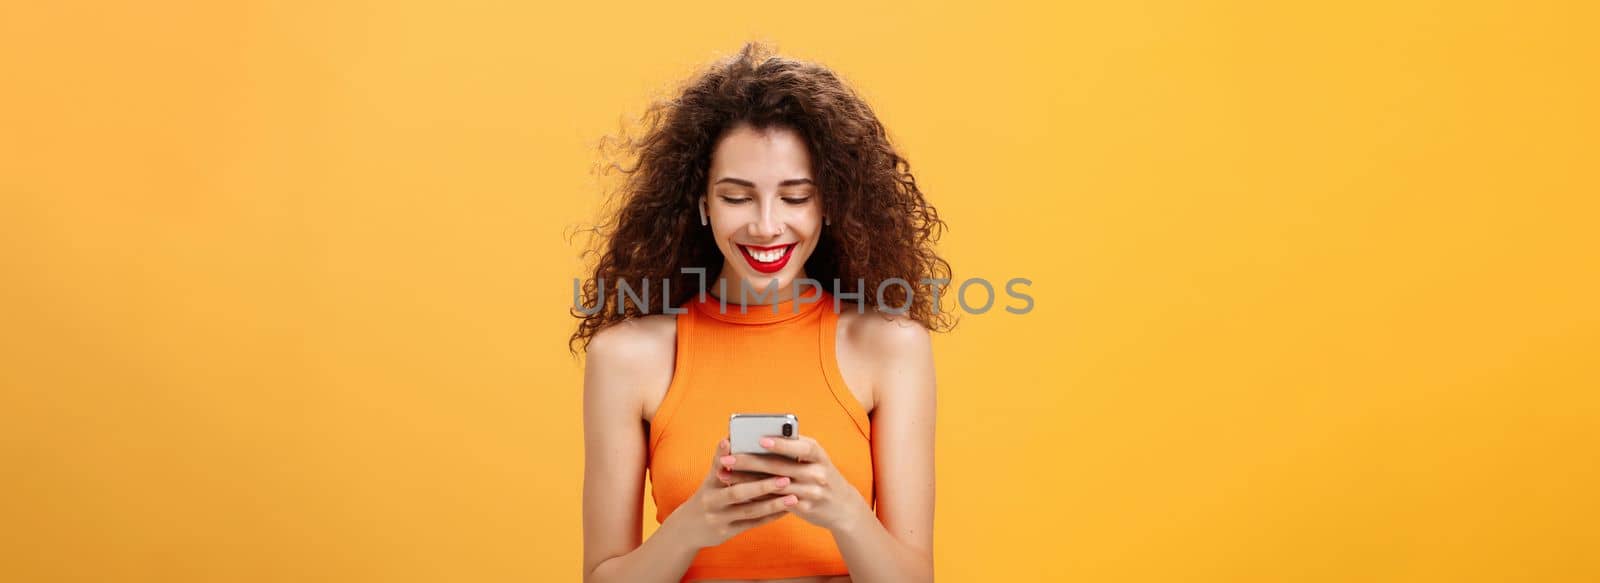 Stylish young attractive woman with curly hairstyle, nose ring and red lipstick picking song, typing in smartphone listening music in wireless earphones smiling at device screen over orange wall.